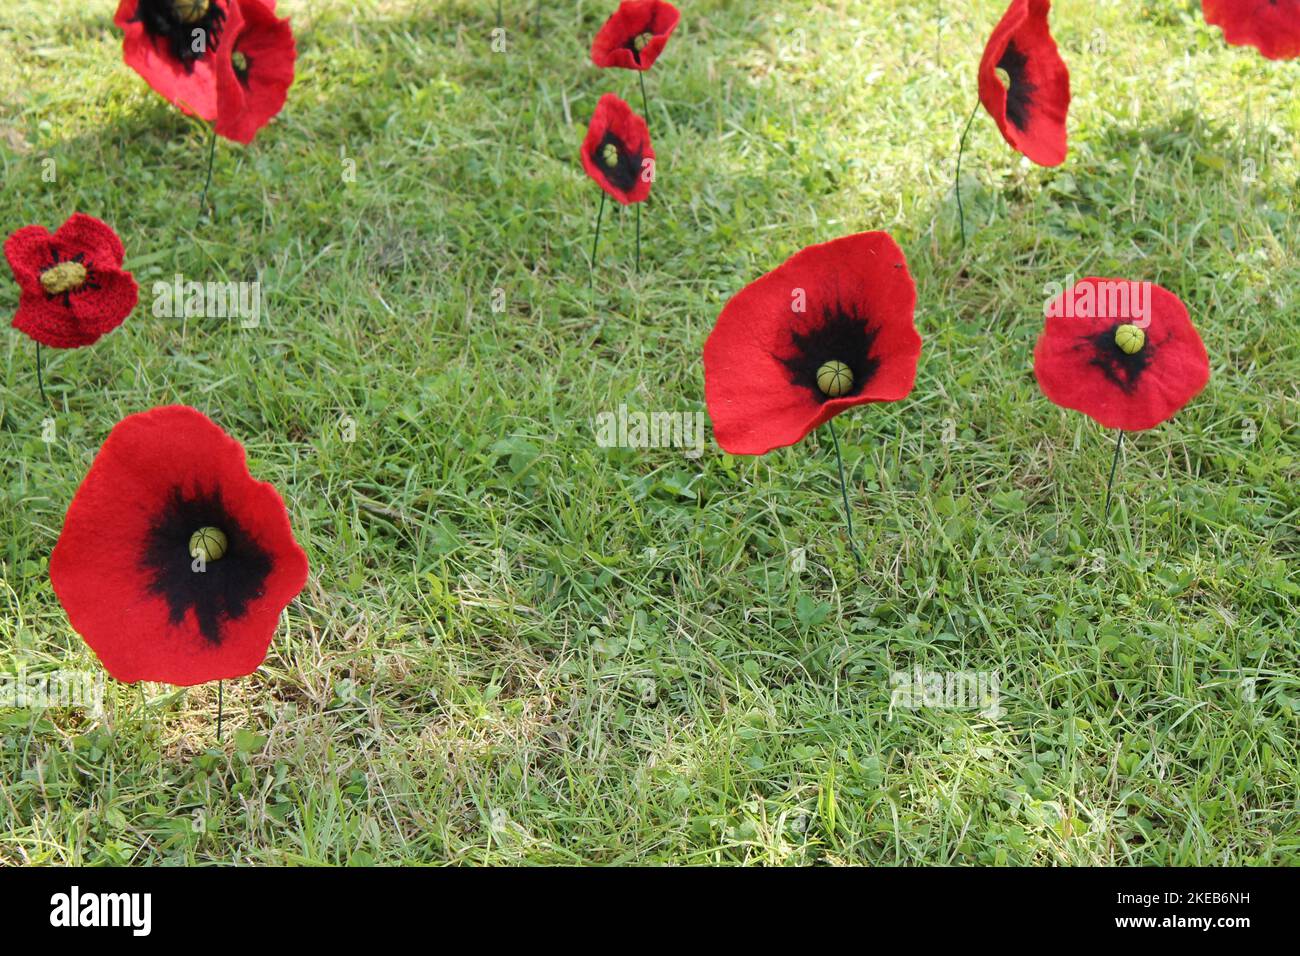 Artificial Poppy Flowers Displayed on a Grass Meadow. Stock Photo